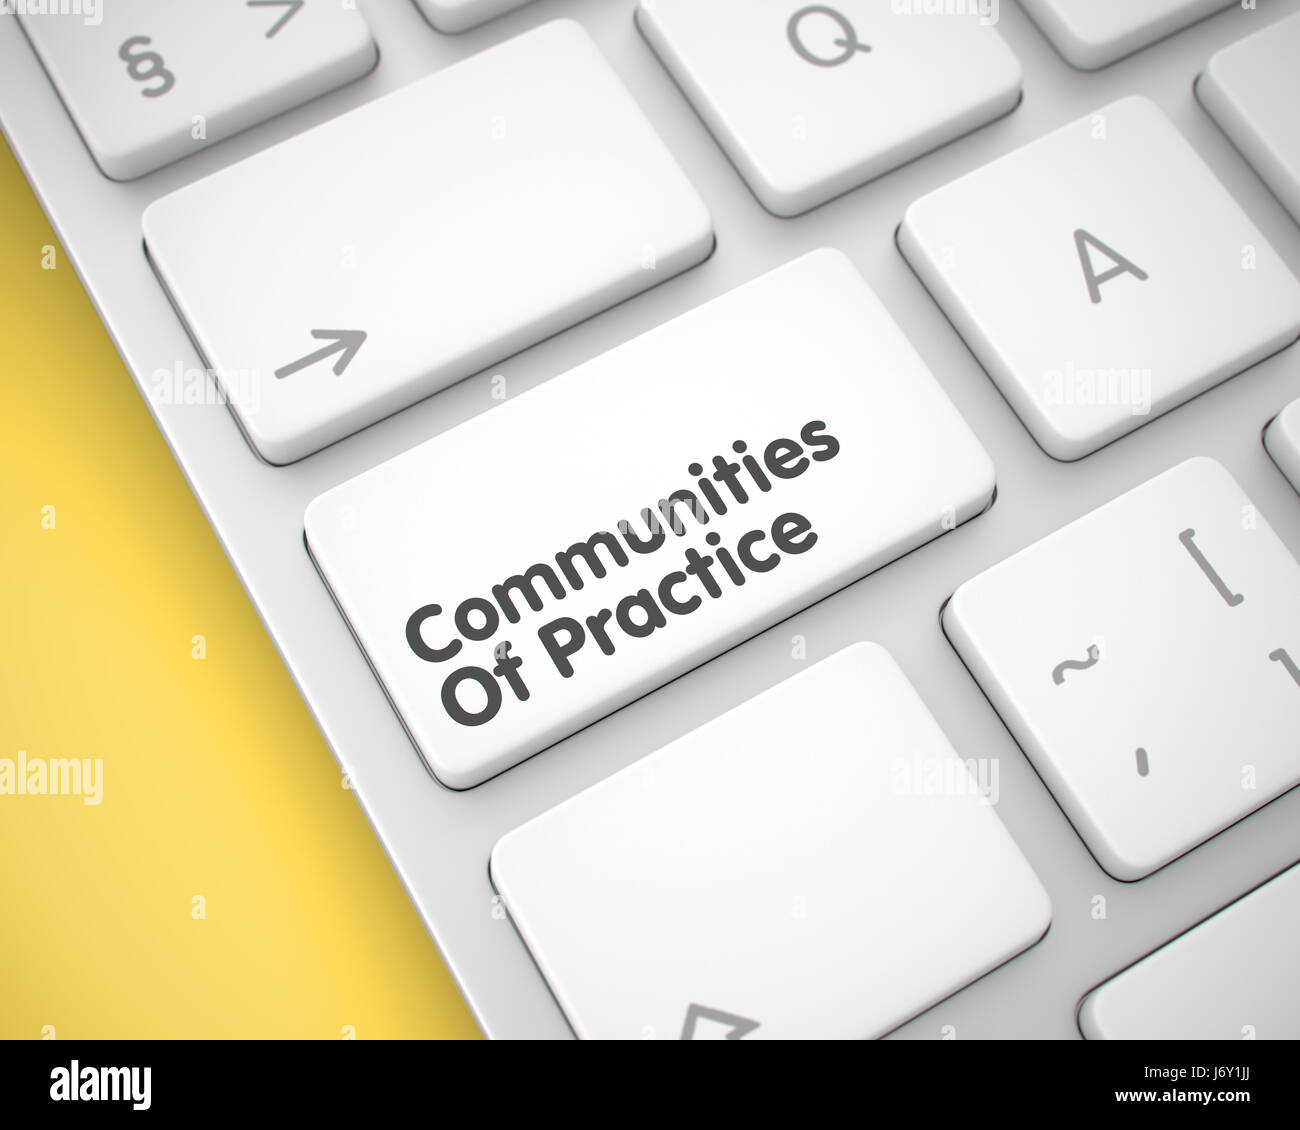 Communities Of Practice - Message on the White Keyboard Button.  Stock Photo